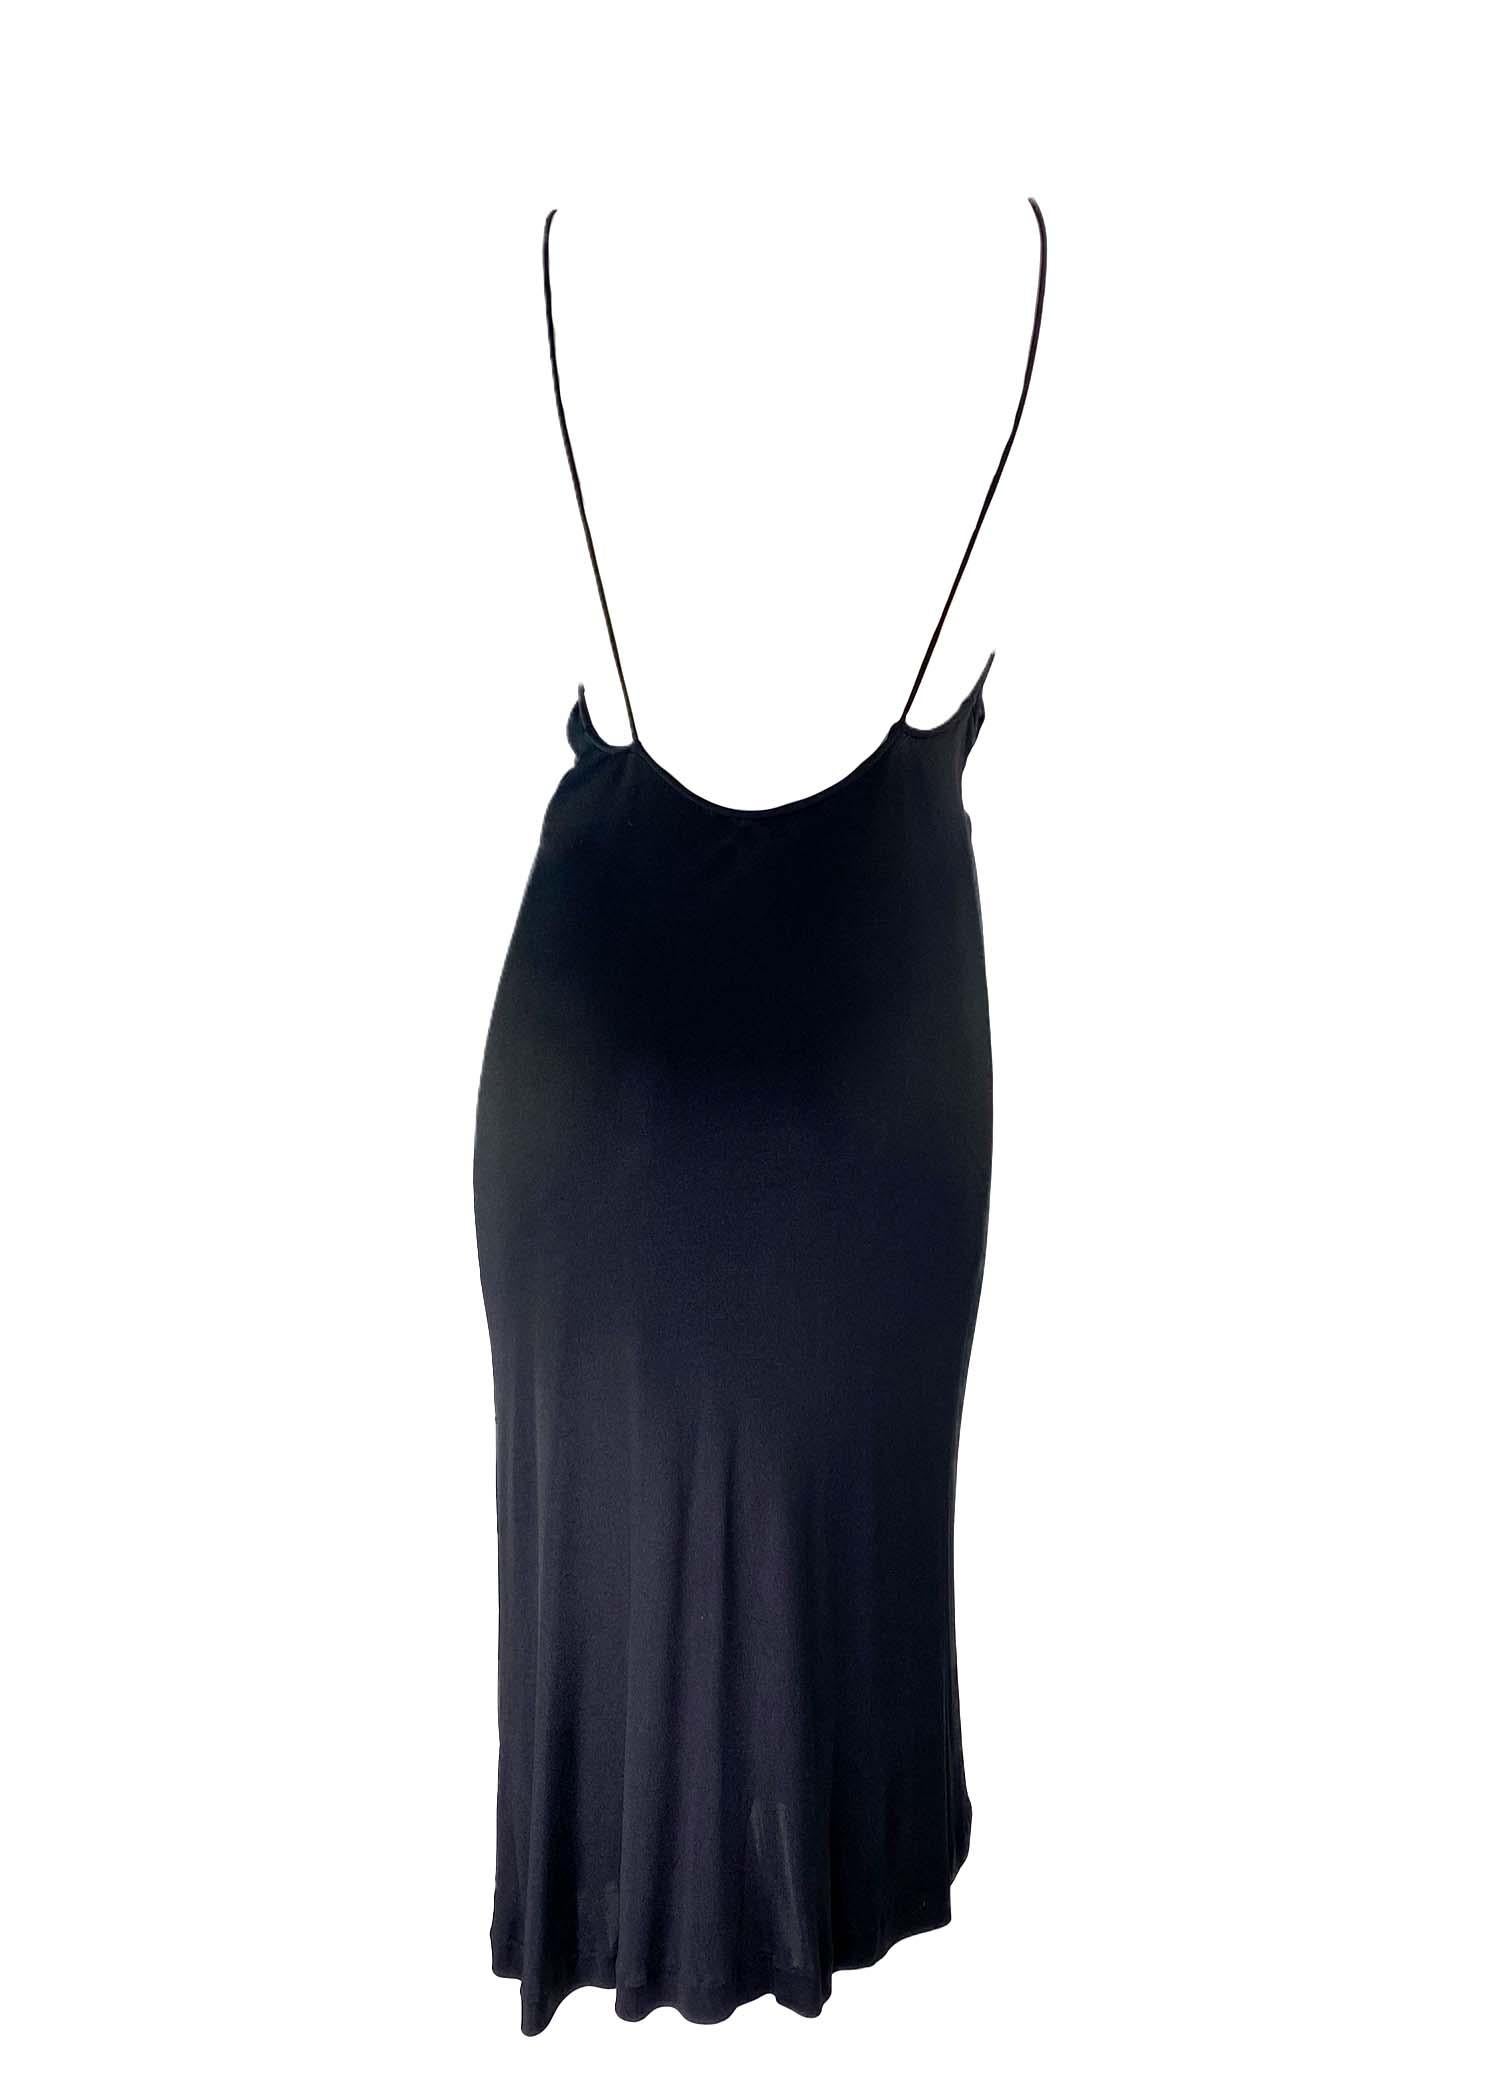 Presenting a gorgeous backless viscose Gucci dress with a patent leather trim, designed by Tom Ford for Gucci's Fall/Winter 1999 collection. This Midi dress is ruched around the front facing patent leather accent which draws the neckline in to